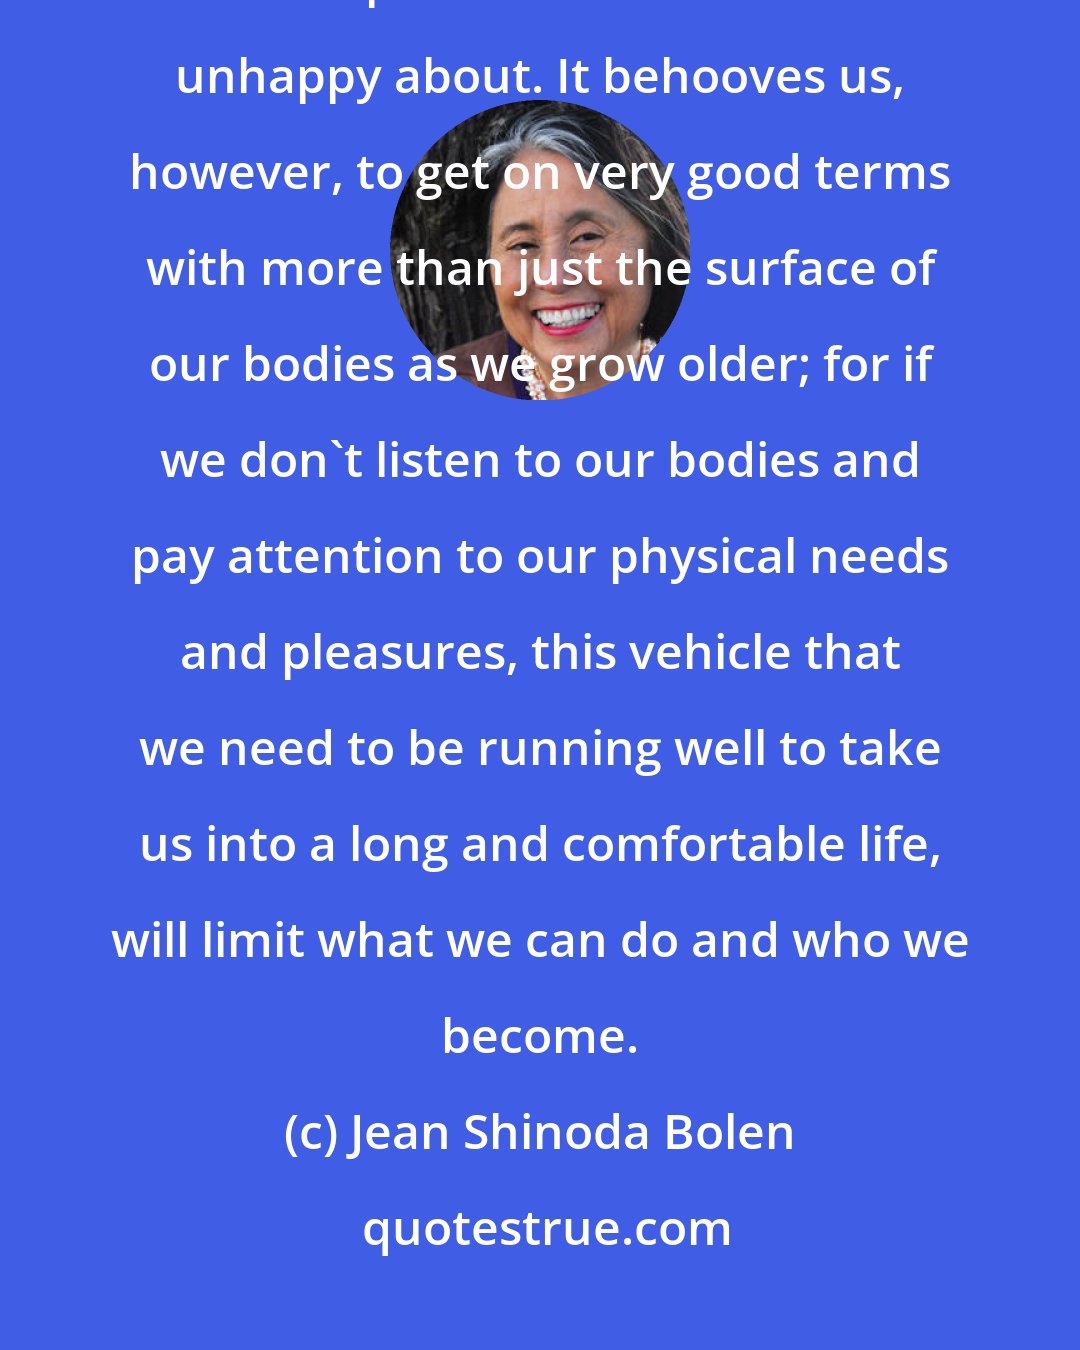 Jean Shinoda Bolen: We usually do pay attention to our outer appearance, typically noticing whatever part of our bodies we are unhappy about. It behooves us, however, to get on very good terms with more than just the surface of our bodies as we grow older; for if we don't listen to our bodies and pay attention to our physical needs and pleasures, this vehicle that we need to be running well to take us into a long and comfortable life, will limit what we can do and who we become.